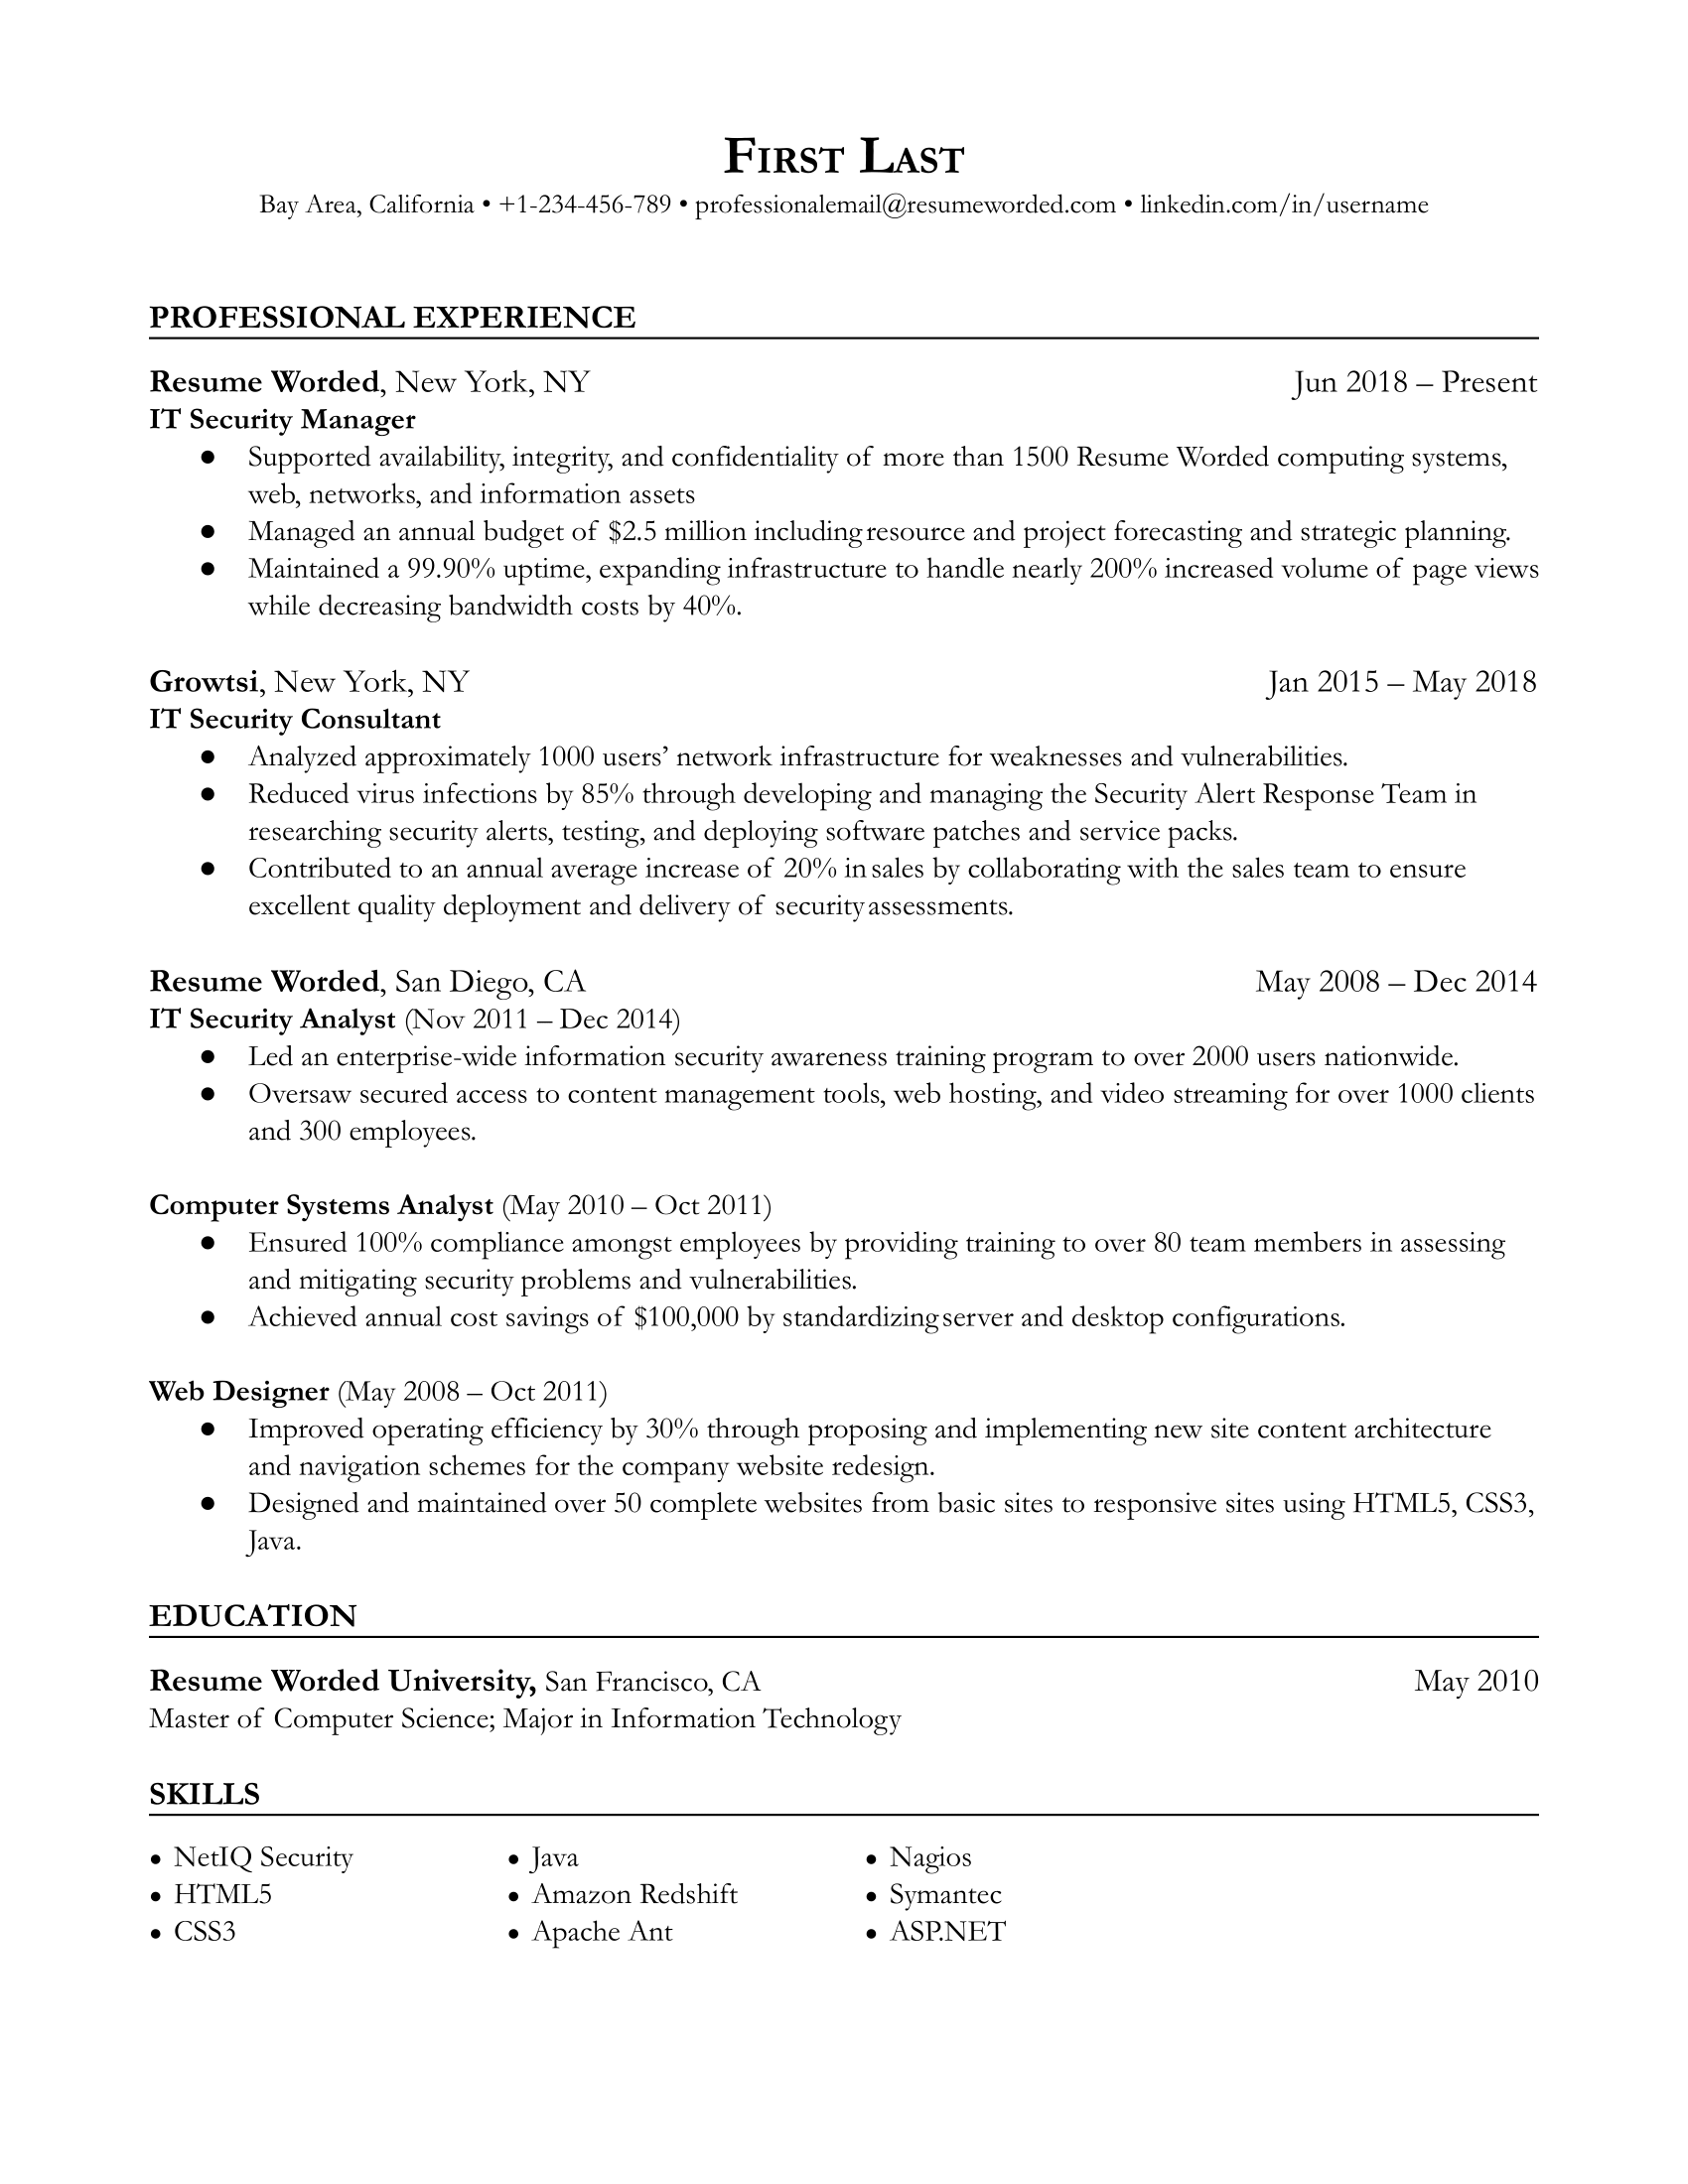 IT Security Manager Resume Template + Example